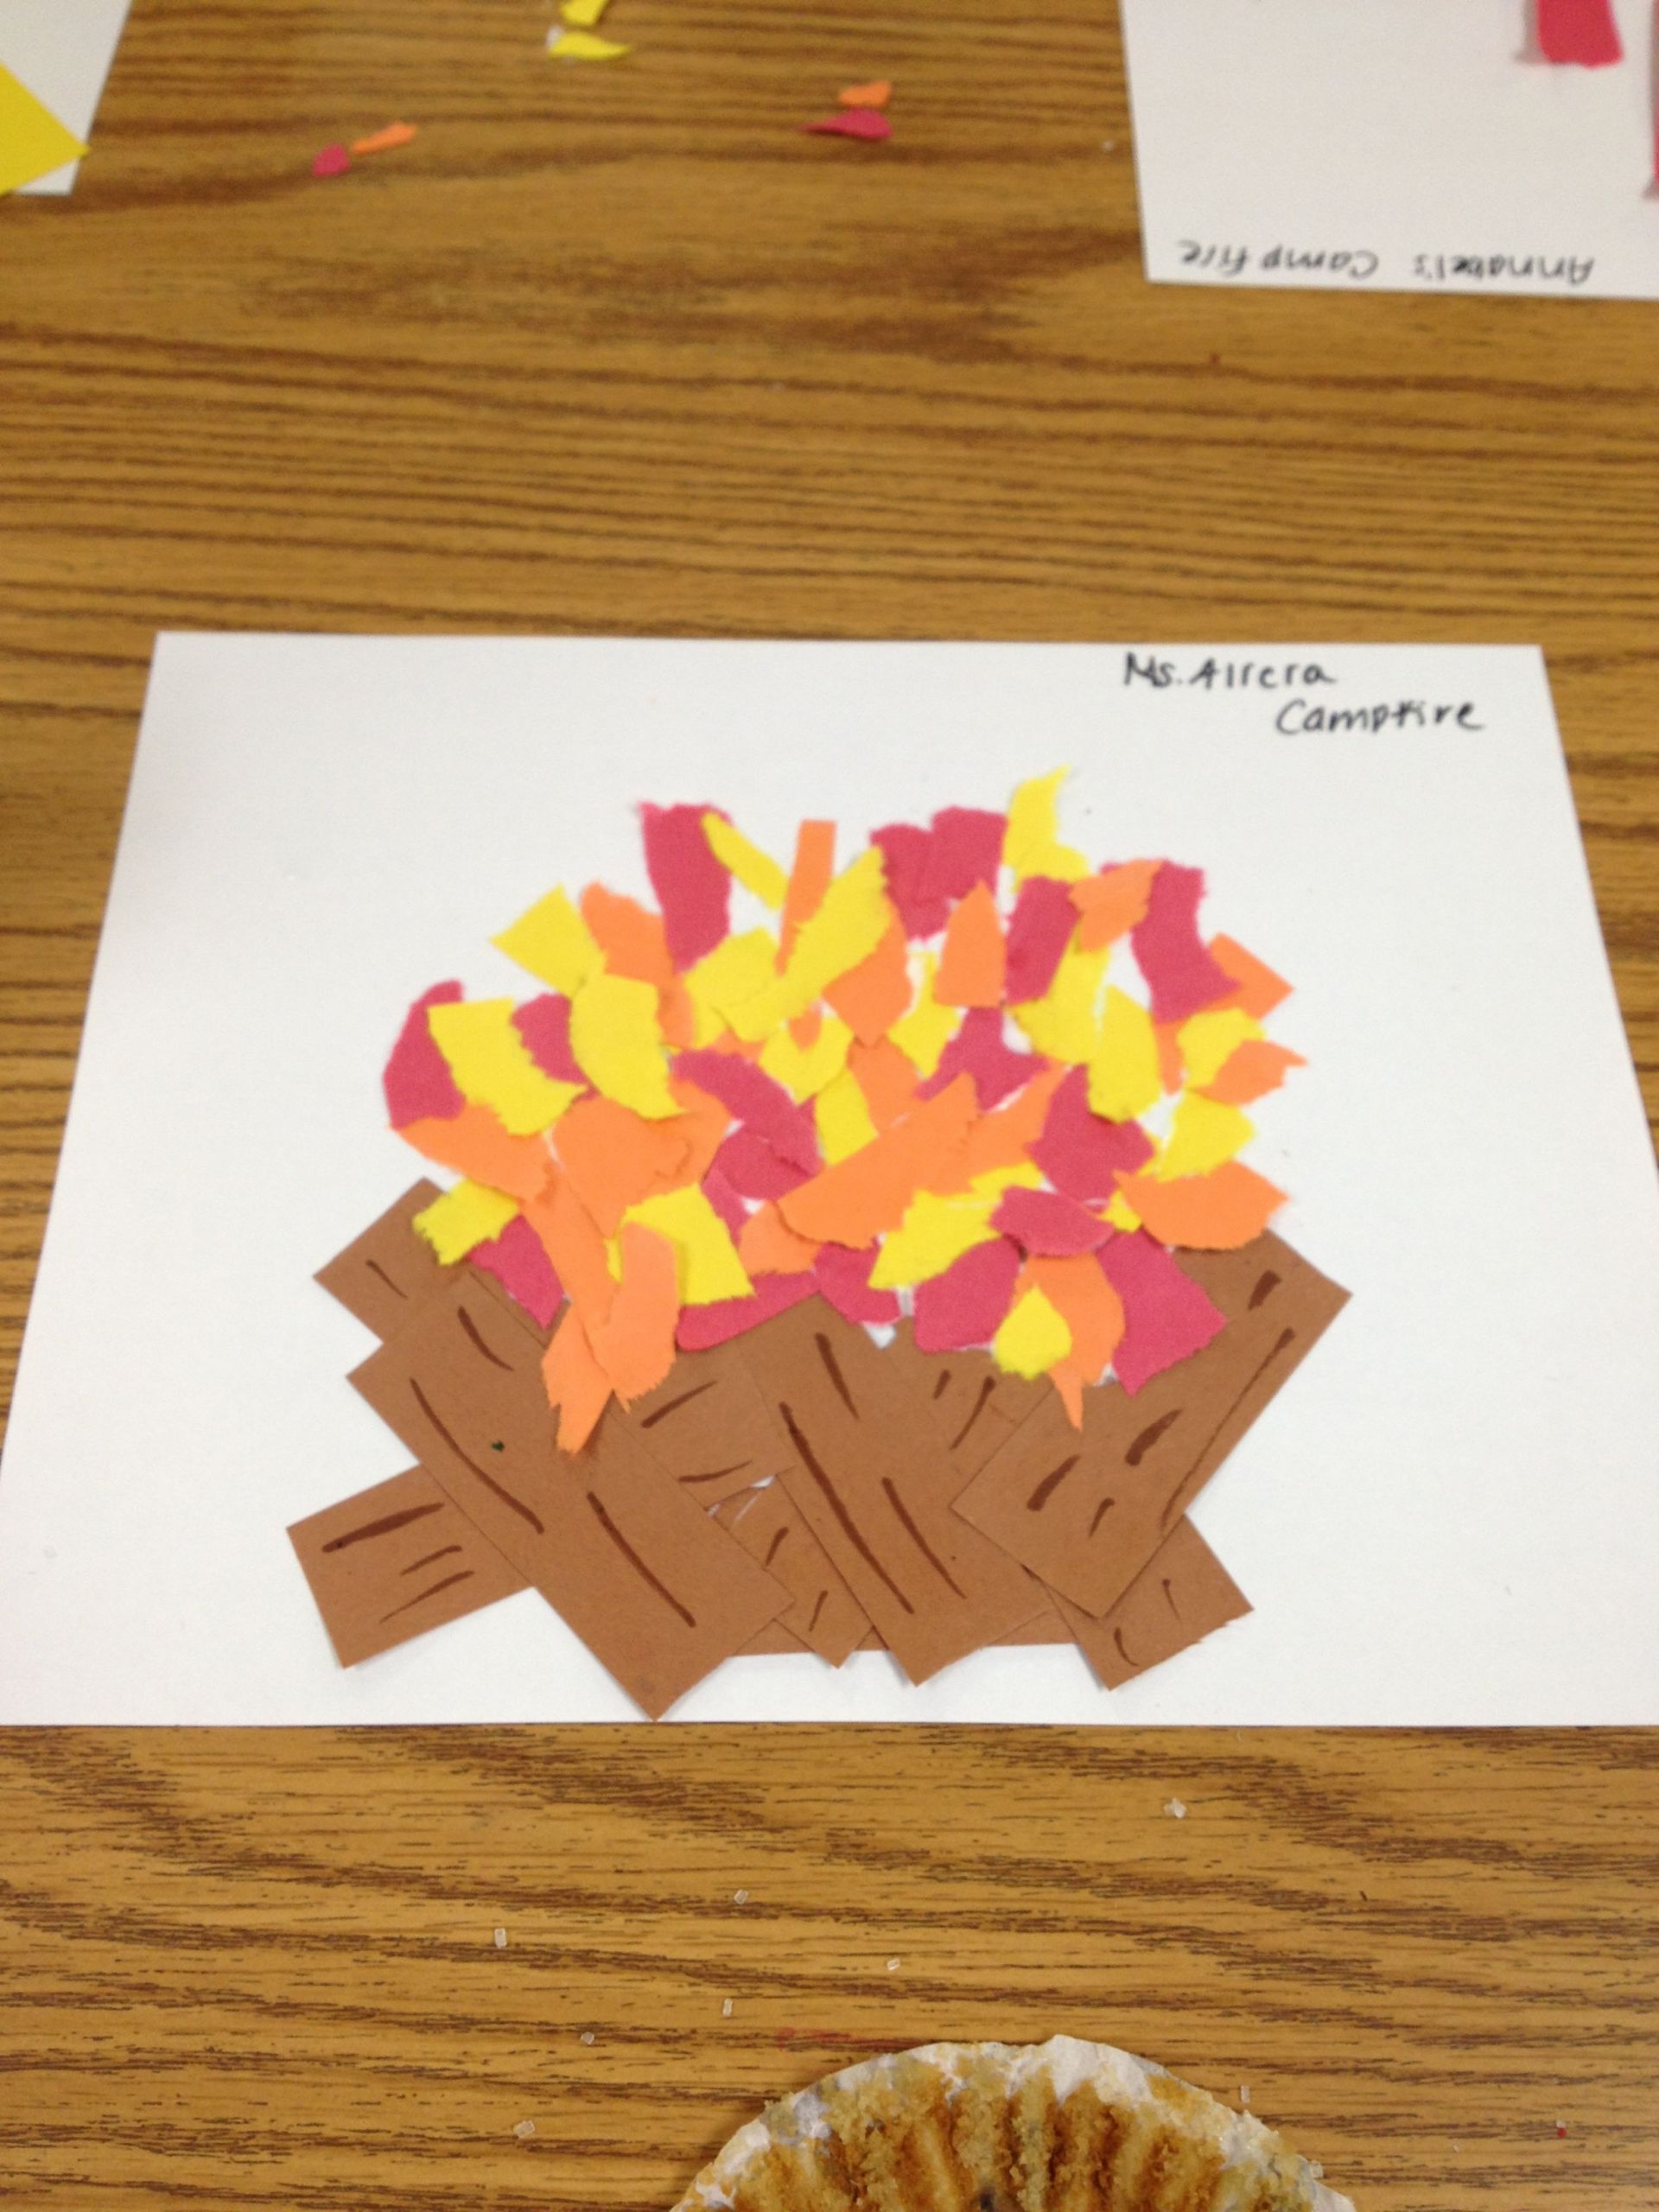 Preschool Camping Art Projects
 Preschool fire collage camping theme